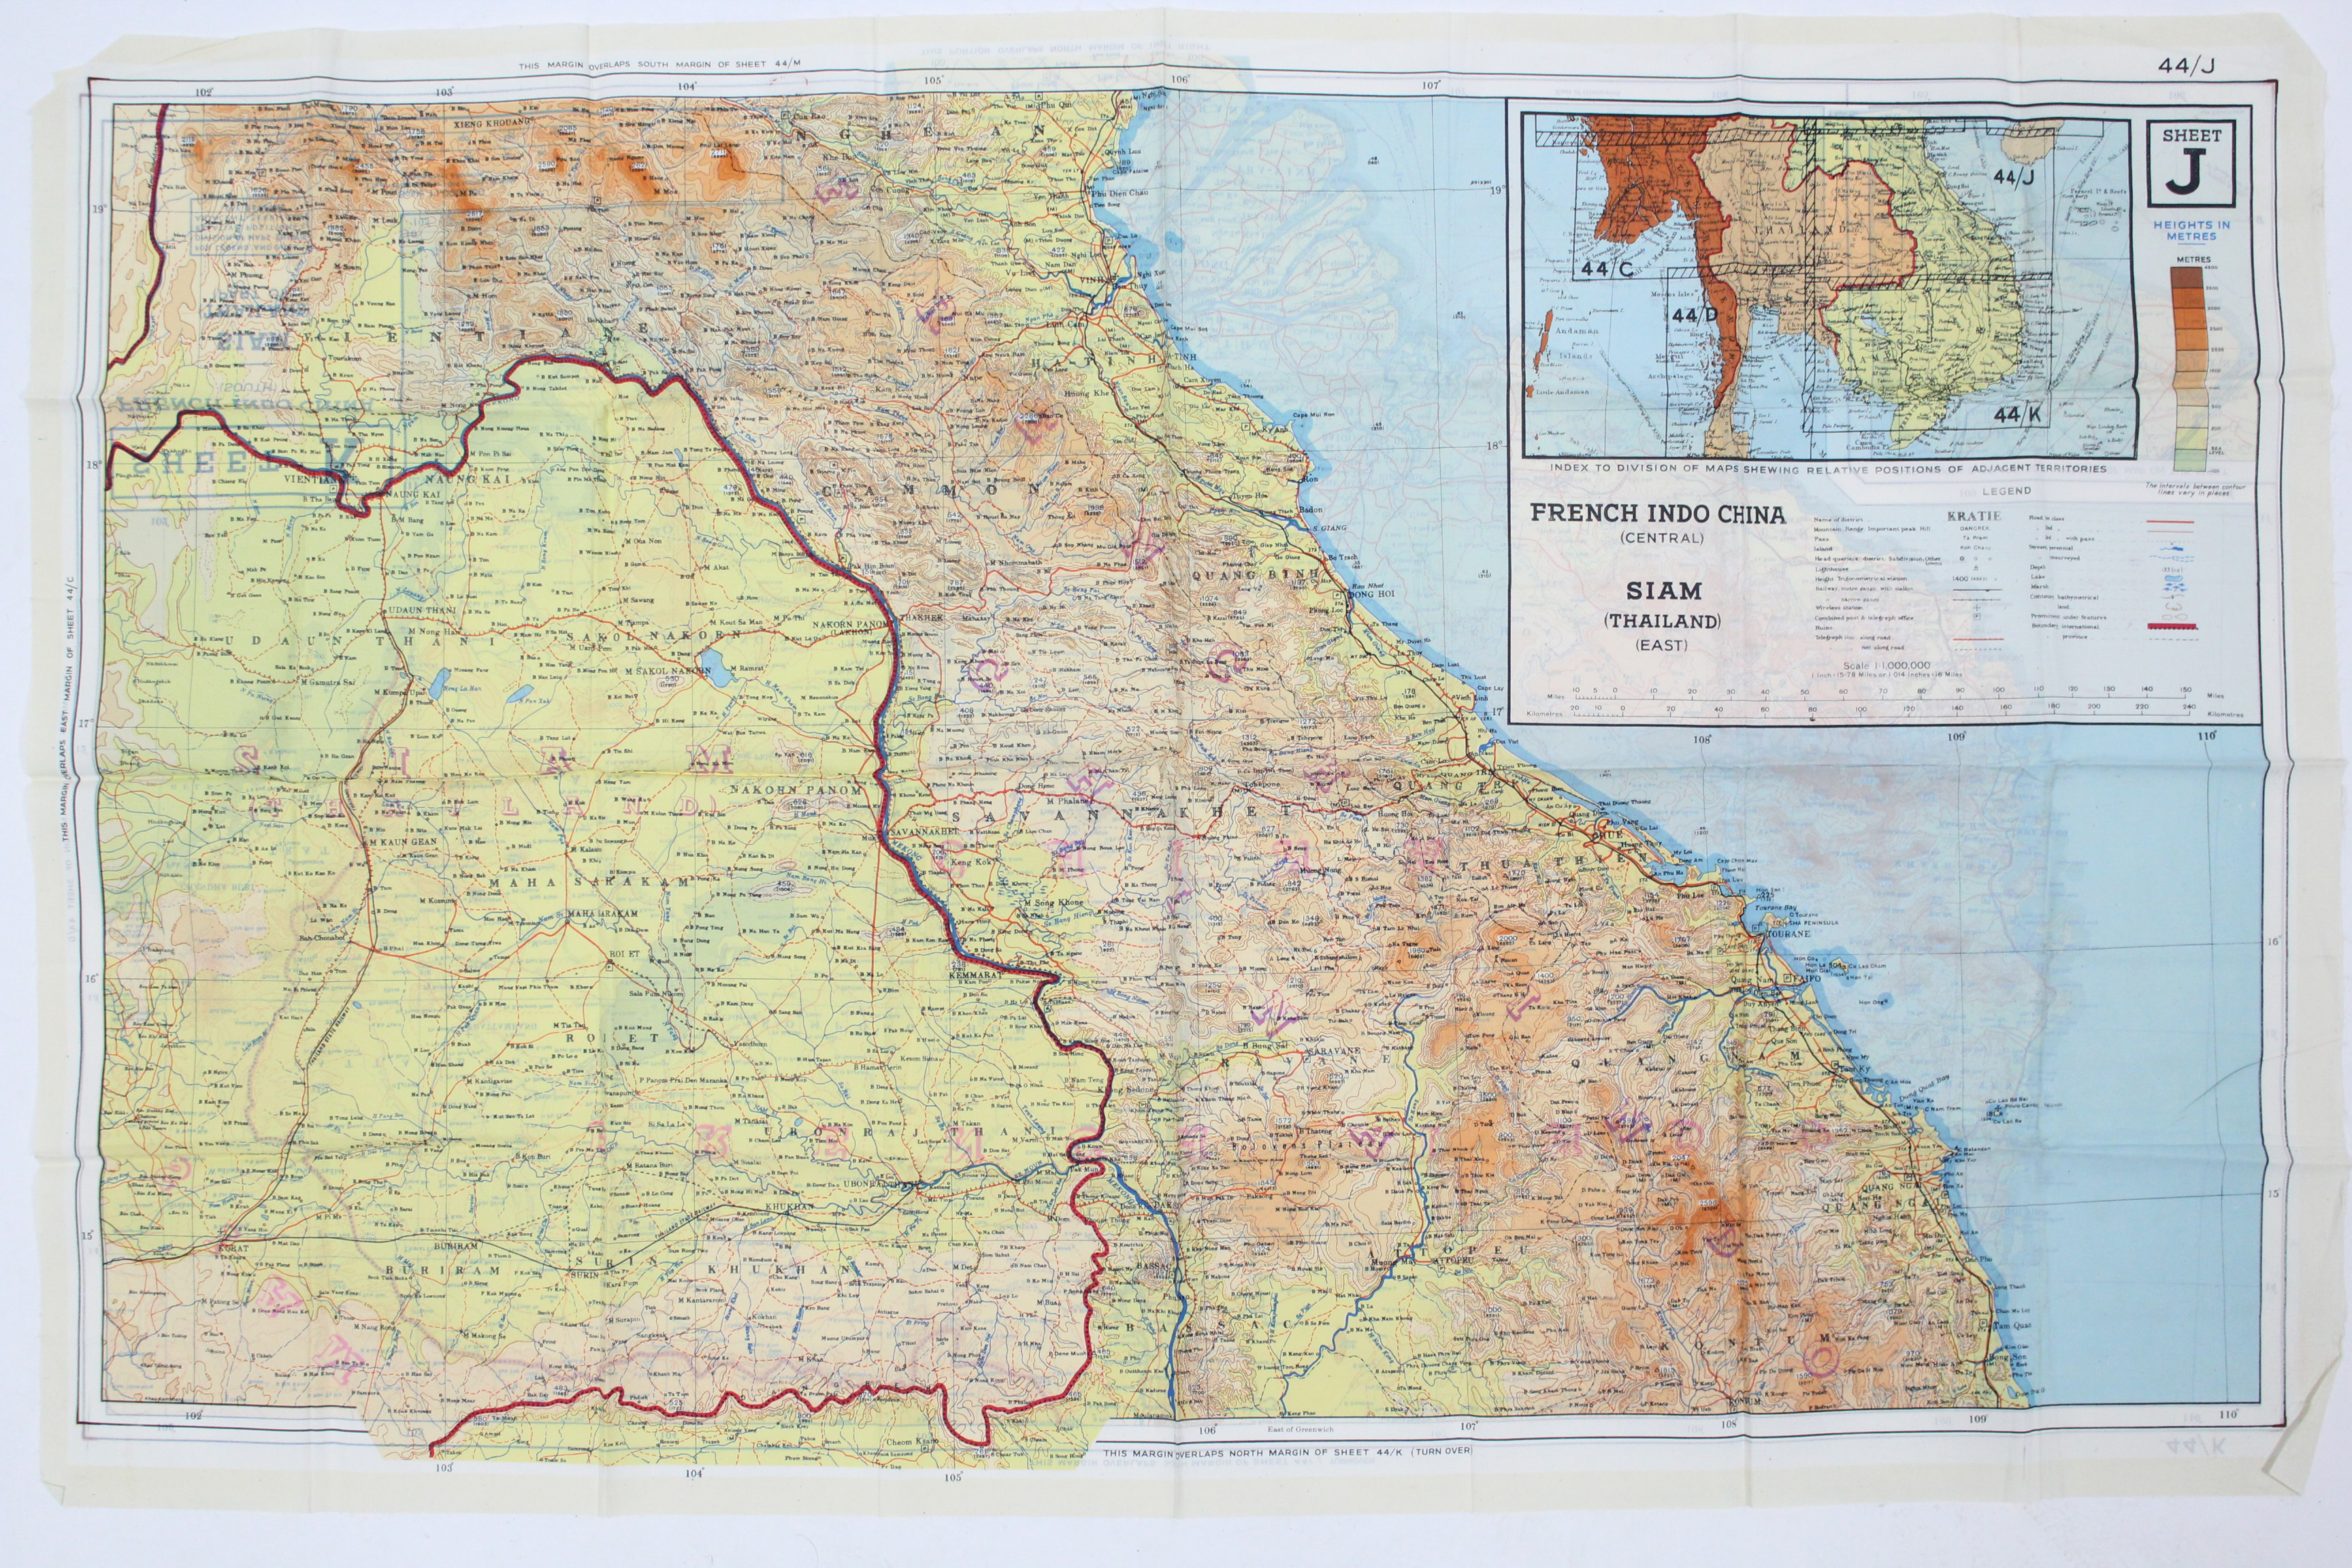 A mid-20th century double-sided pilots map “FRENCH INDO CHINA” (Sheet J & K), 24” x 37½”